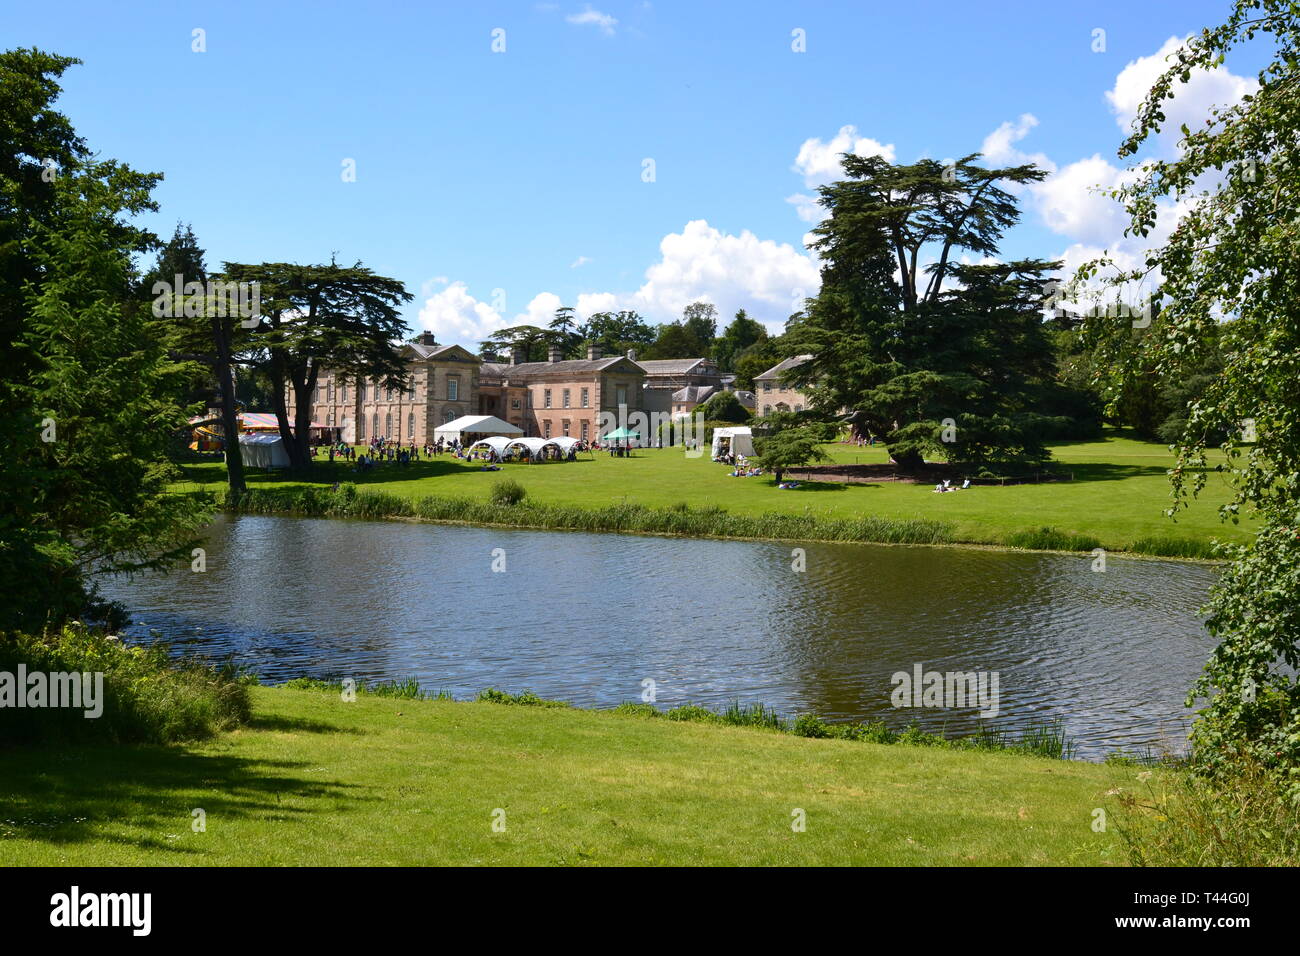 Compton Verney House, Compton Verney, Kineton, Warwickshire, England, UK. 18th century country mansion. Art Gallery with landscaped grounds. Stock Photo